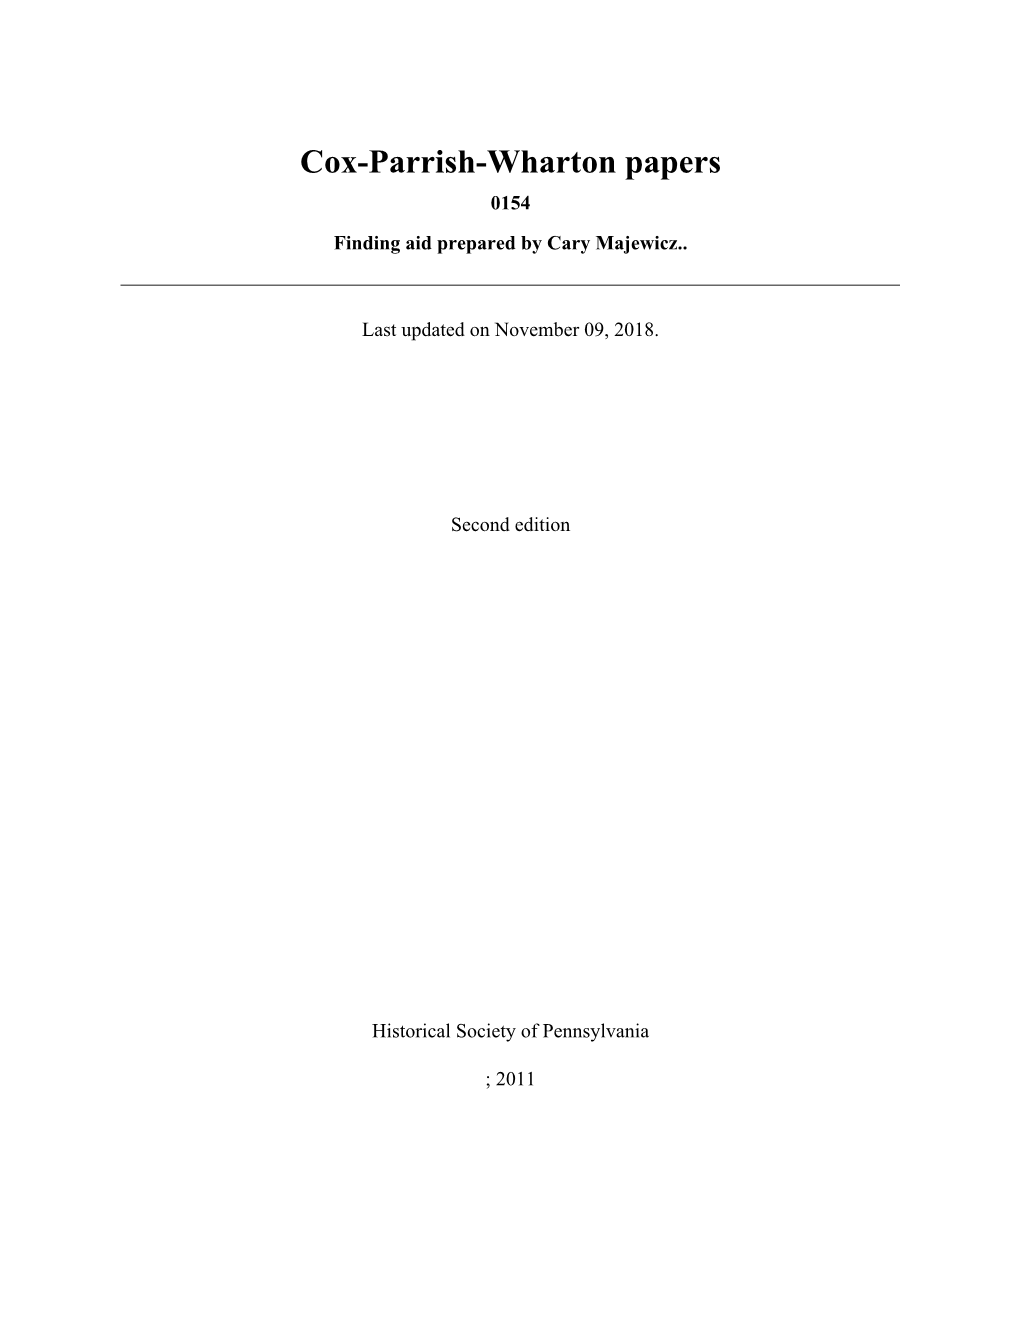 Cox-Parrish-Wharton Papers 0154 Finding Aid Prepared by Cary Majewicz